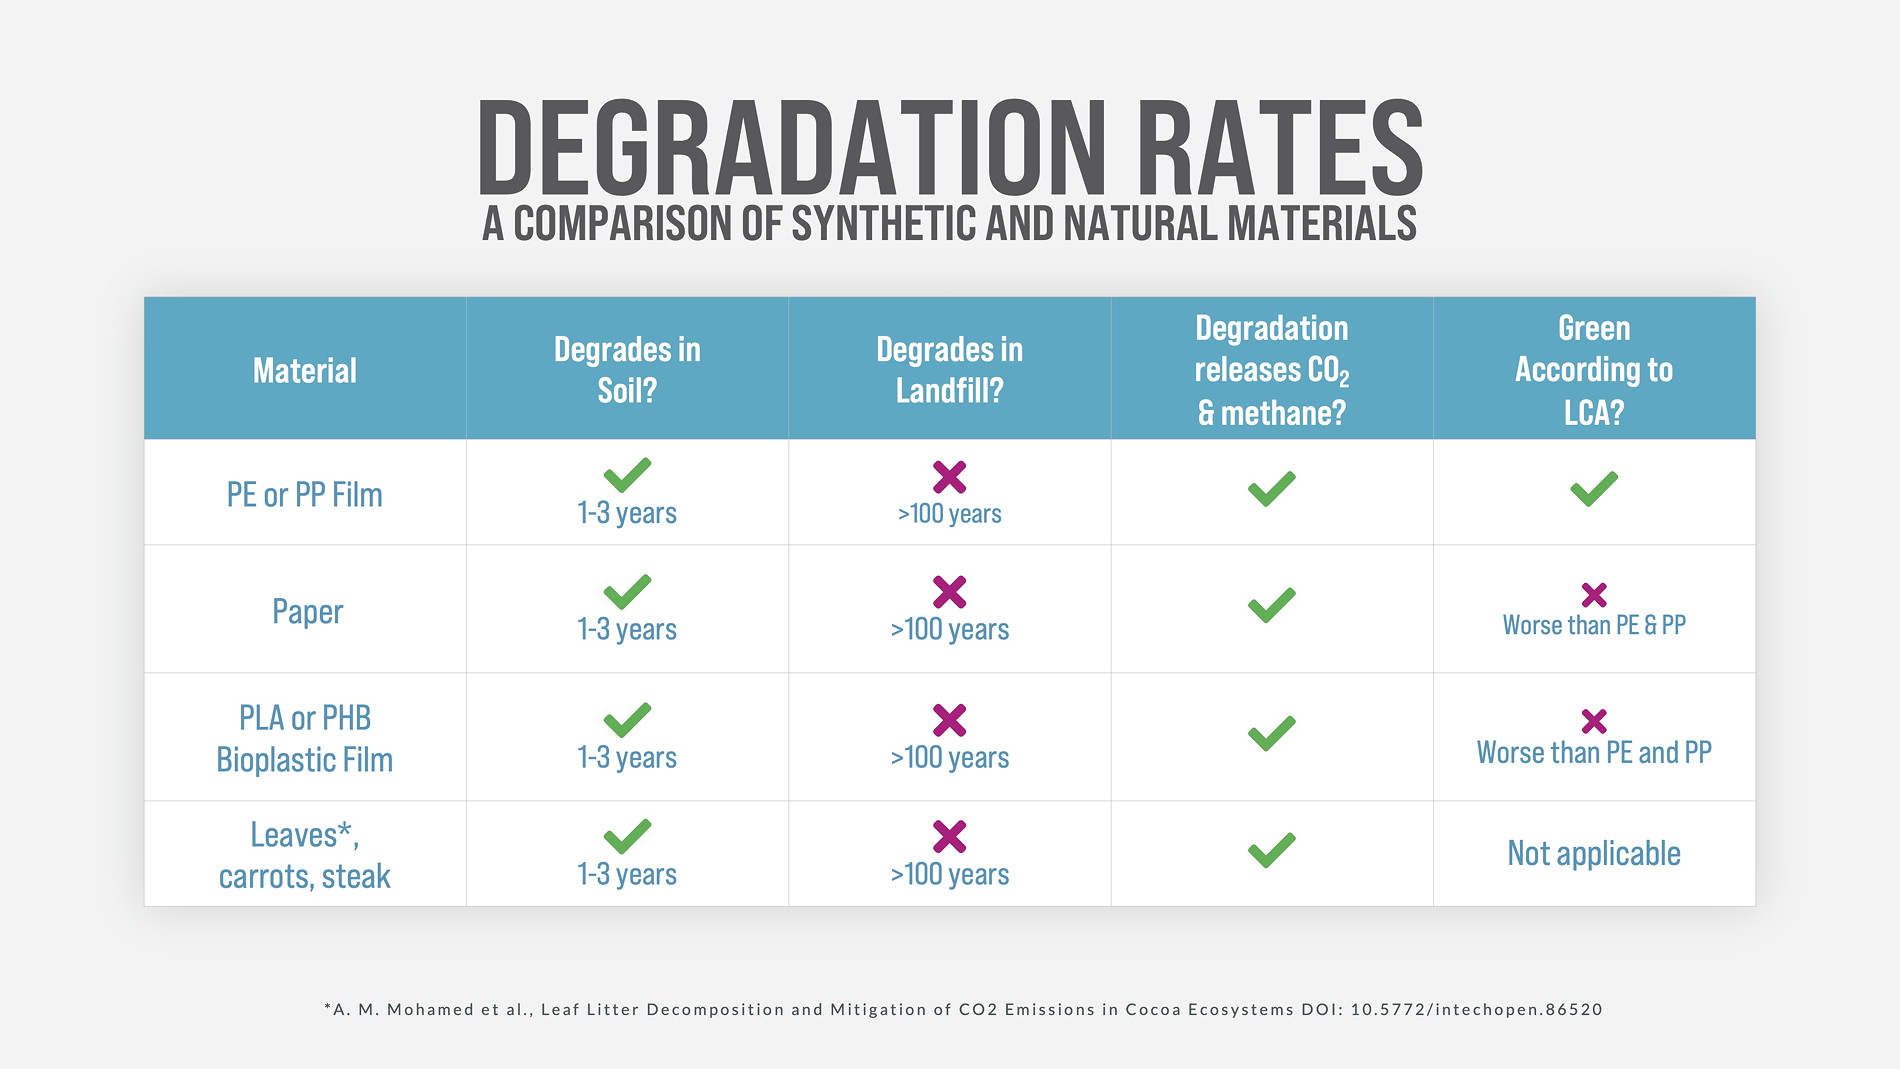 Graph Showing Degradation Rates Compared to Other Materials